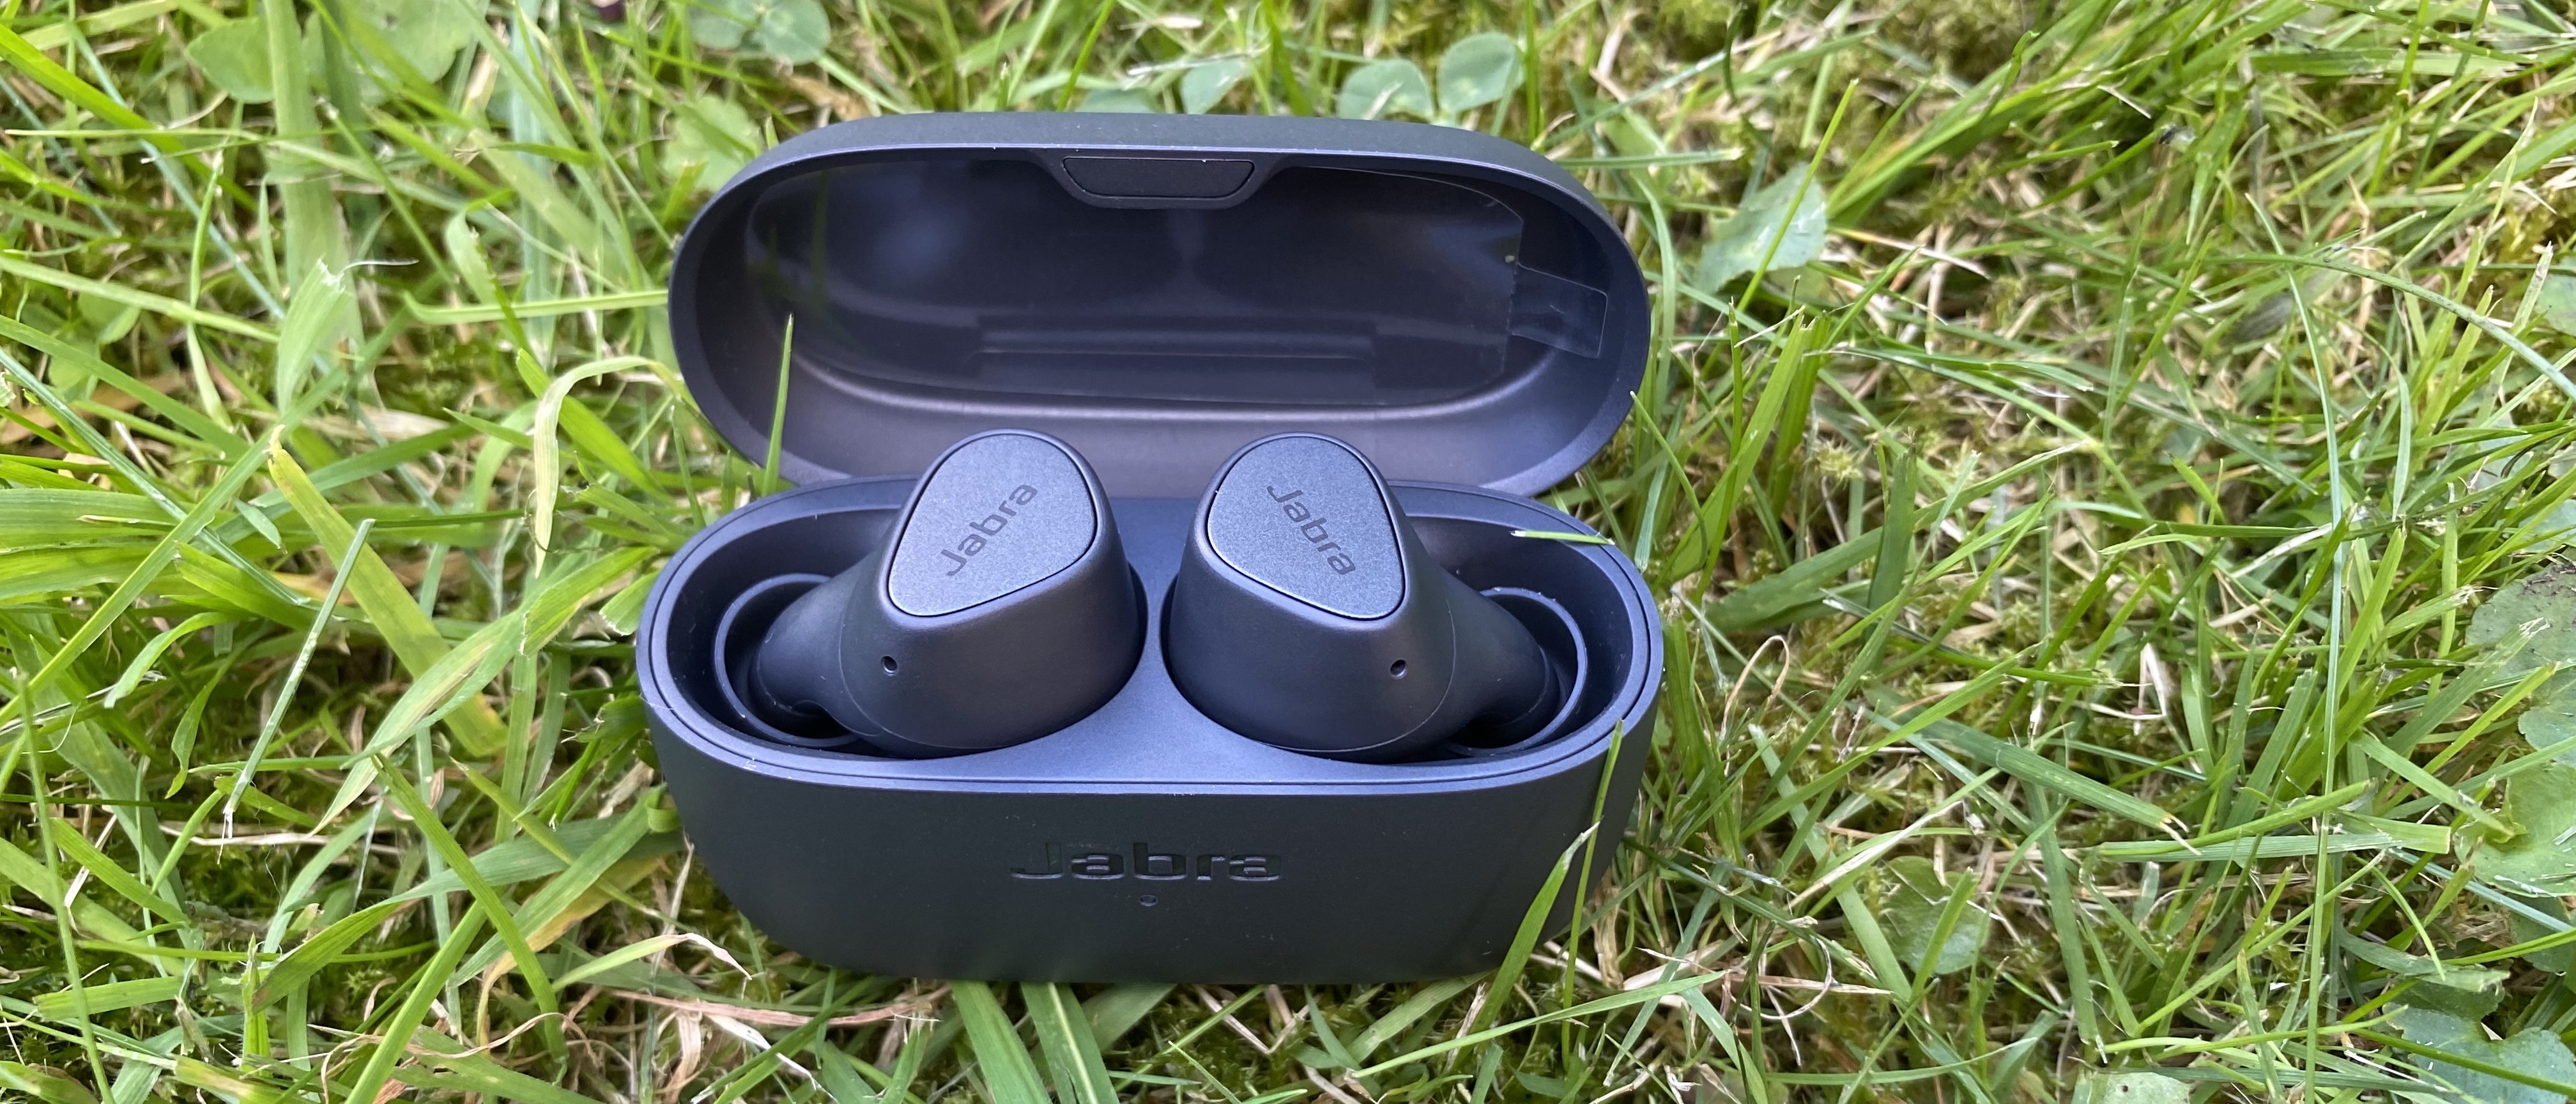 Jabra Elite 3 review: Best wireless earbuds under Rs 6000? Well, almost